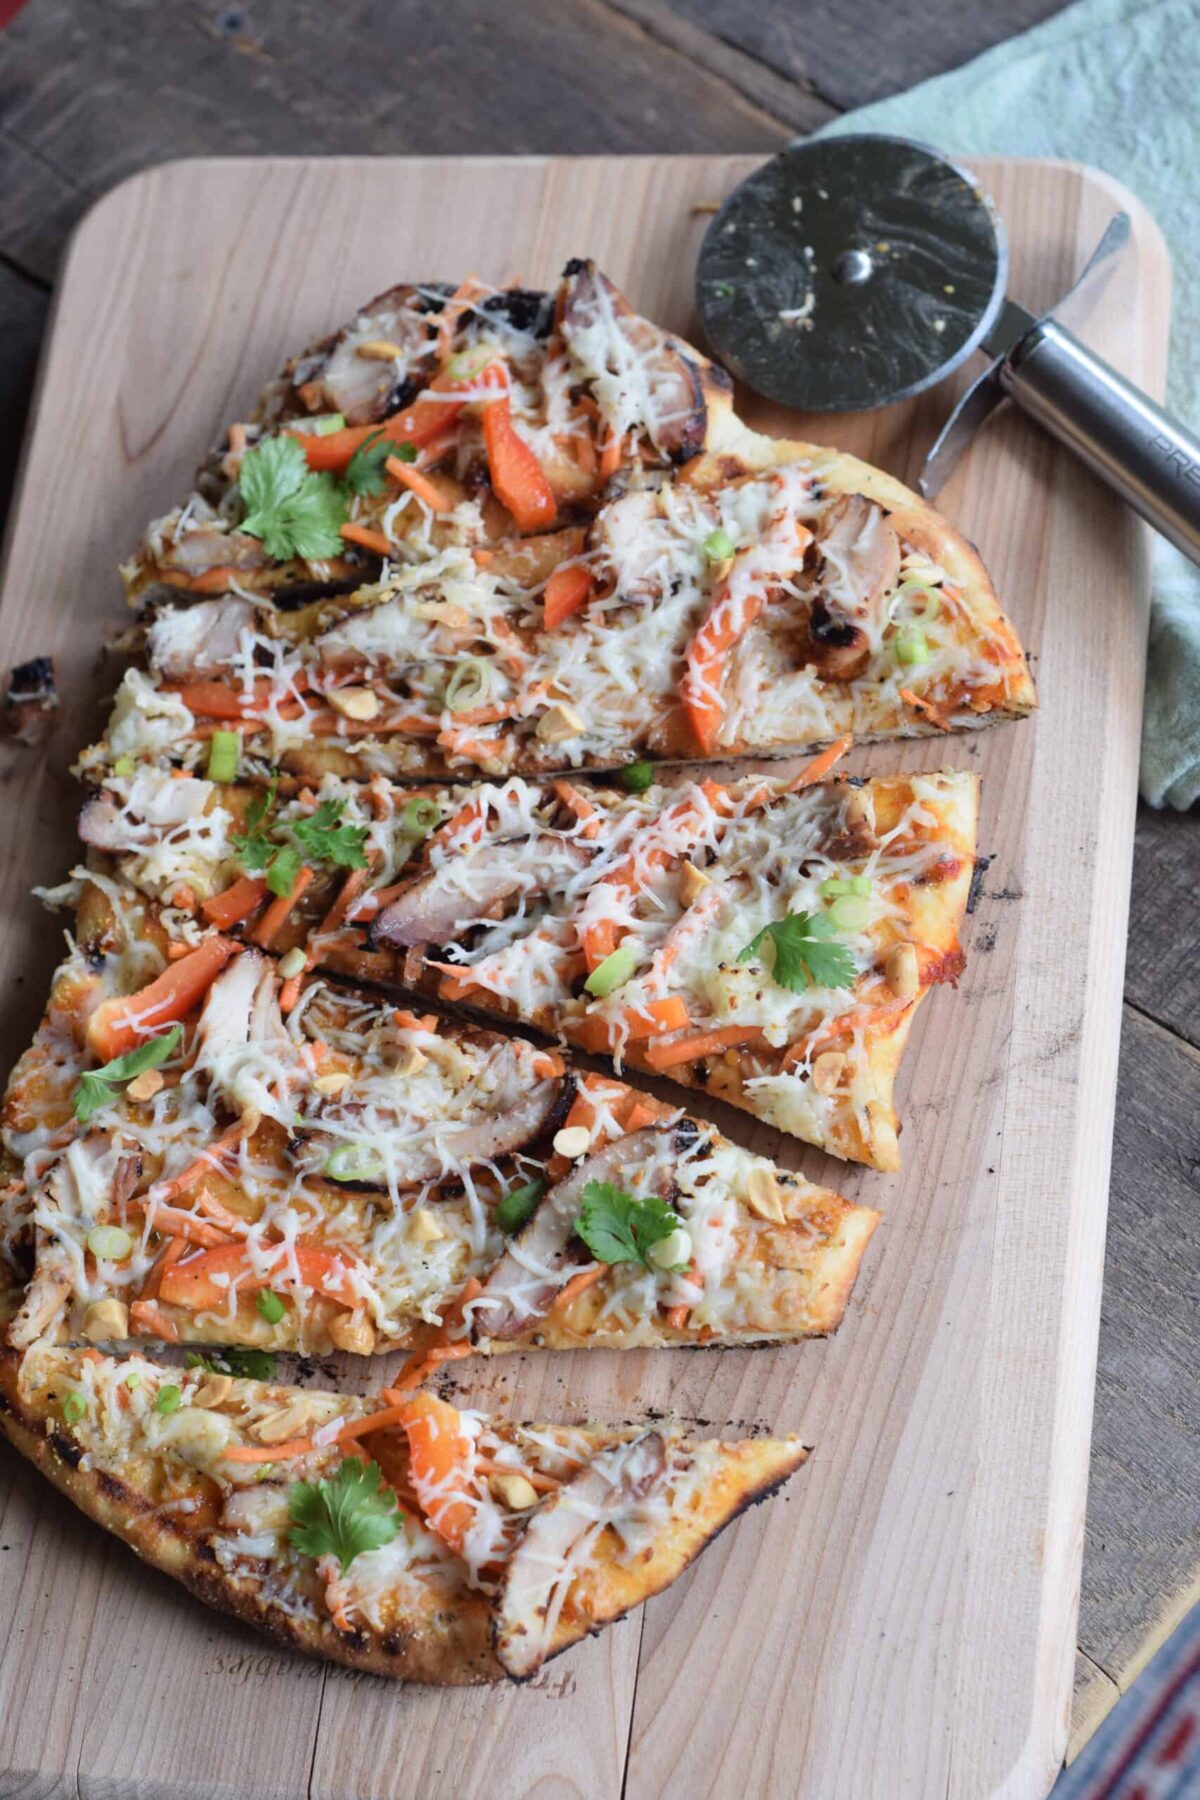 Thai Chicken Grilled Pizza made with Naan bread. pizza wheel on wooden cutting board